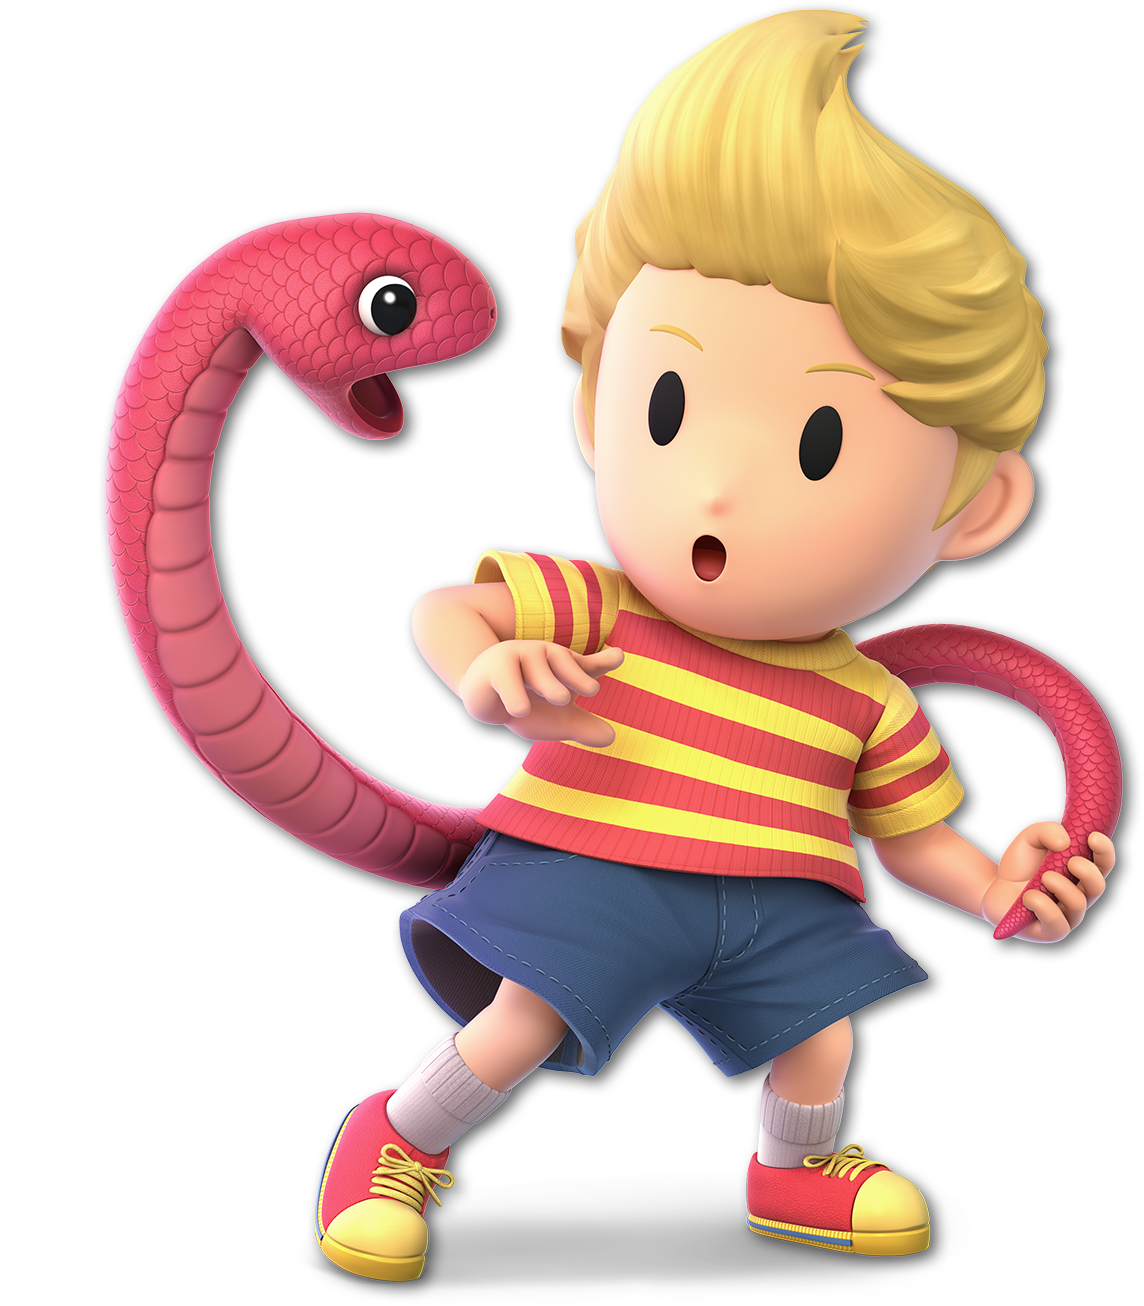 Lucas (EarthBound), Pure Good Wiki